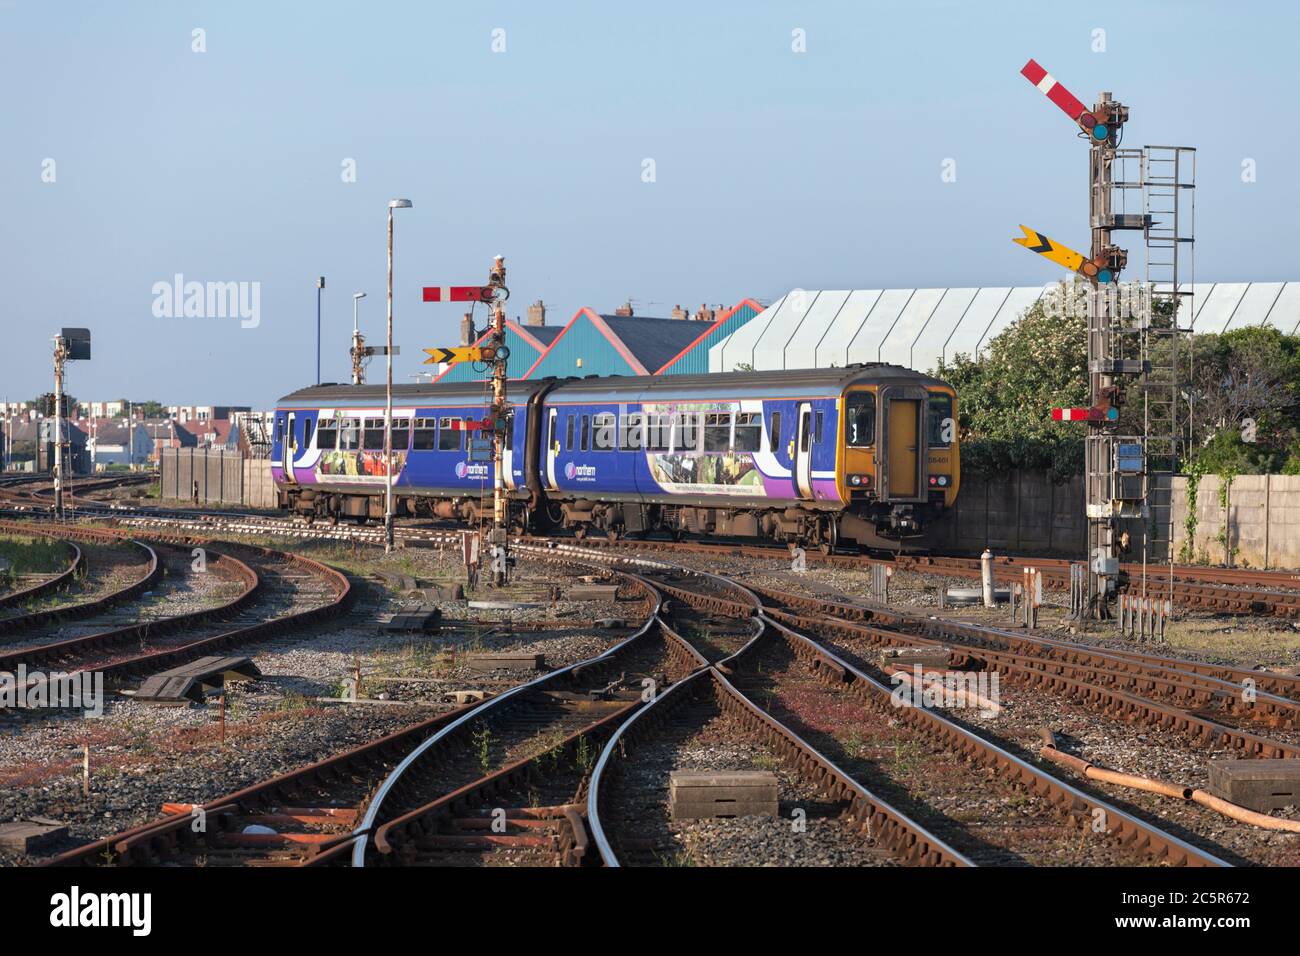 Northern Rail class 156 sprinter train departing Blackpool North railway station with the mechanical semaphore home and distant railway signals Stock Photo